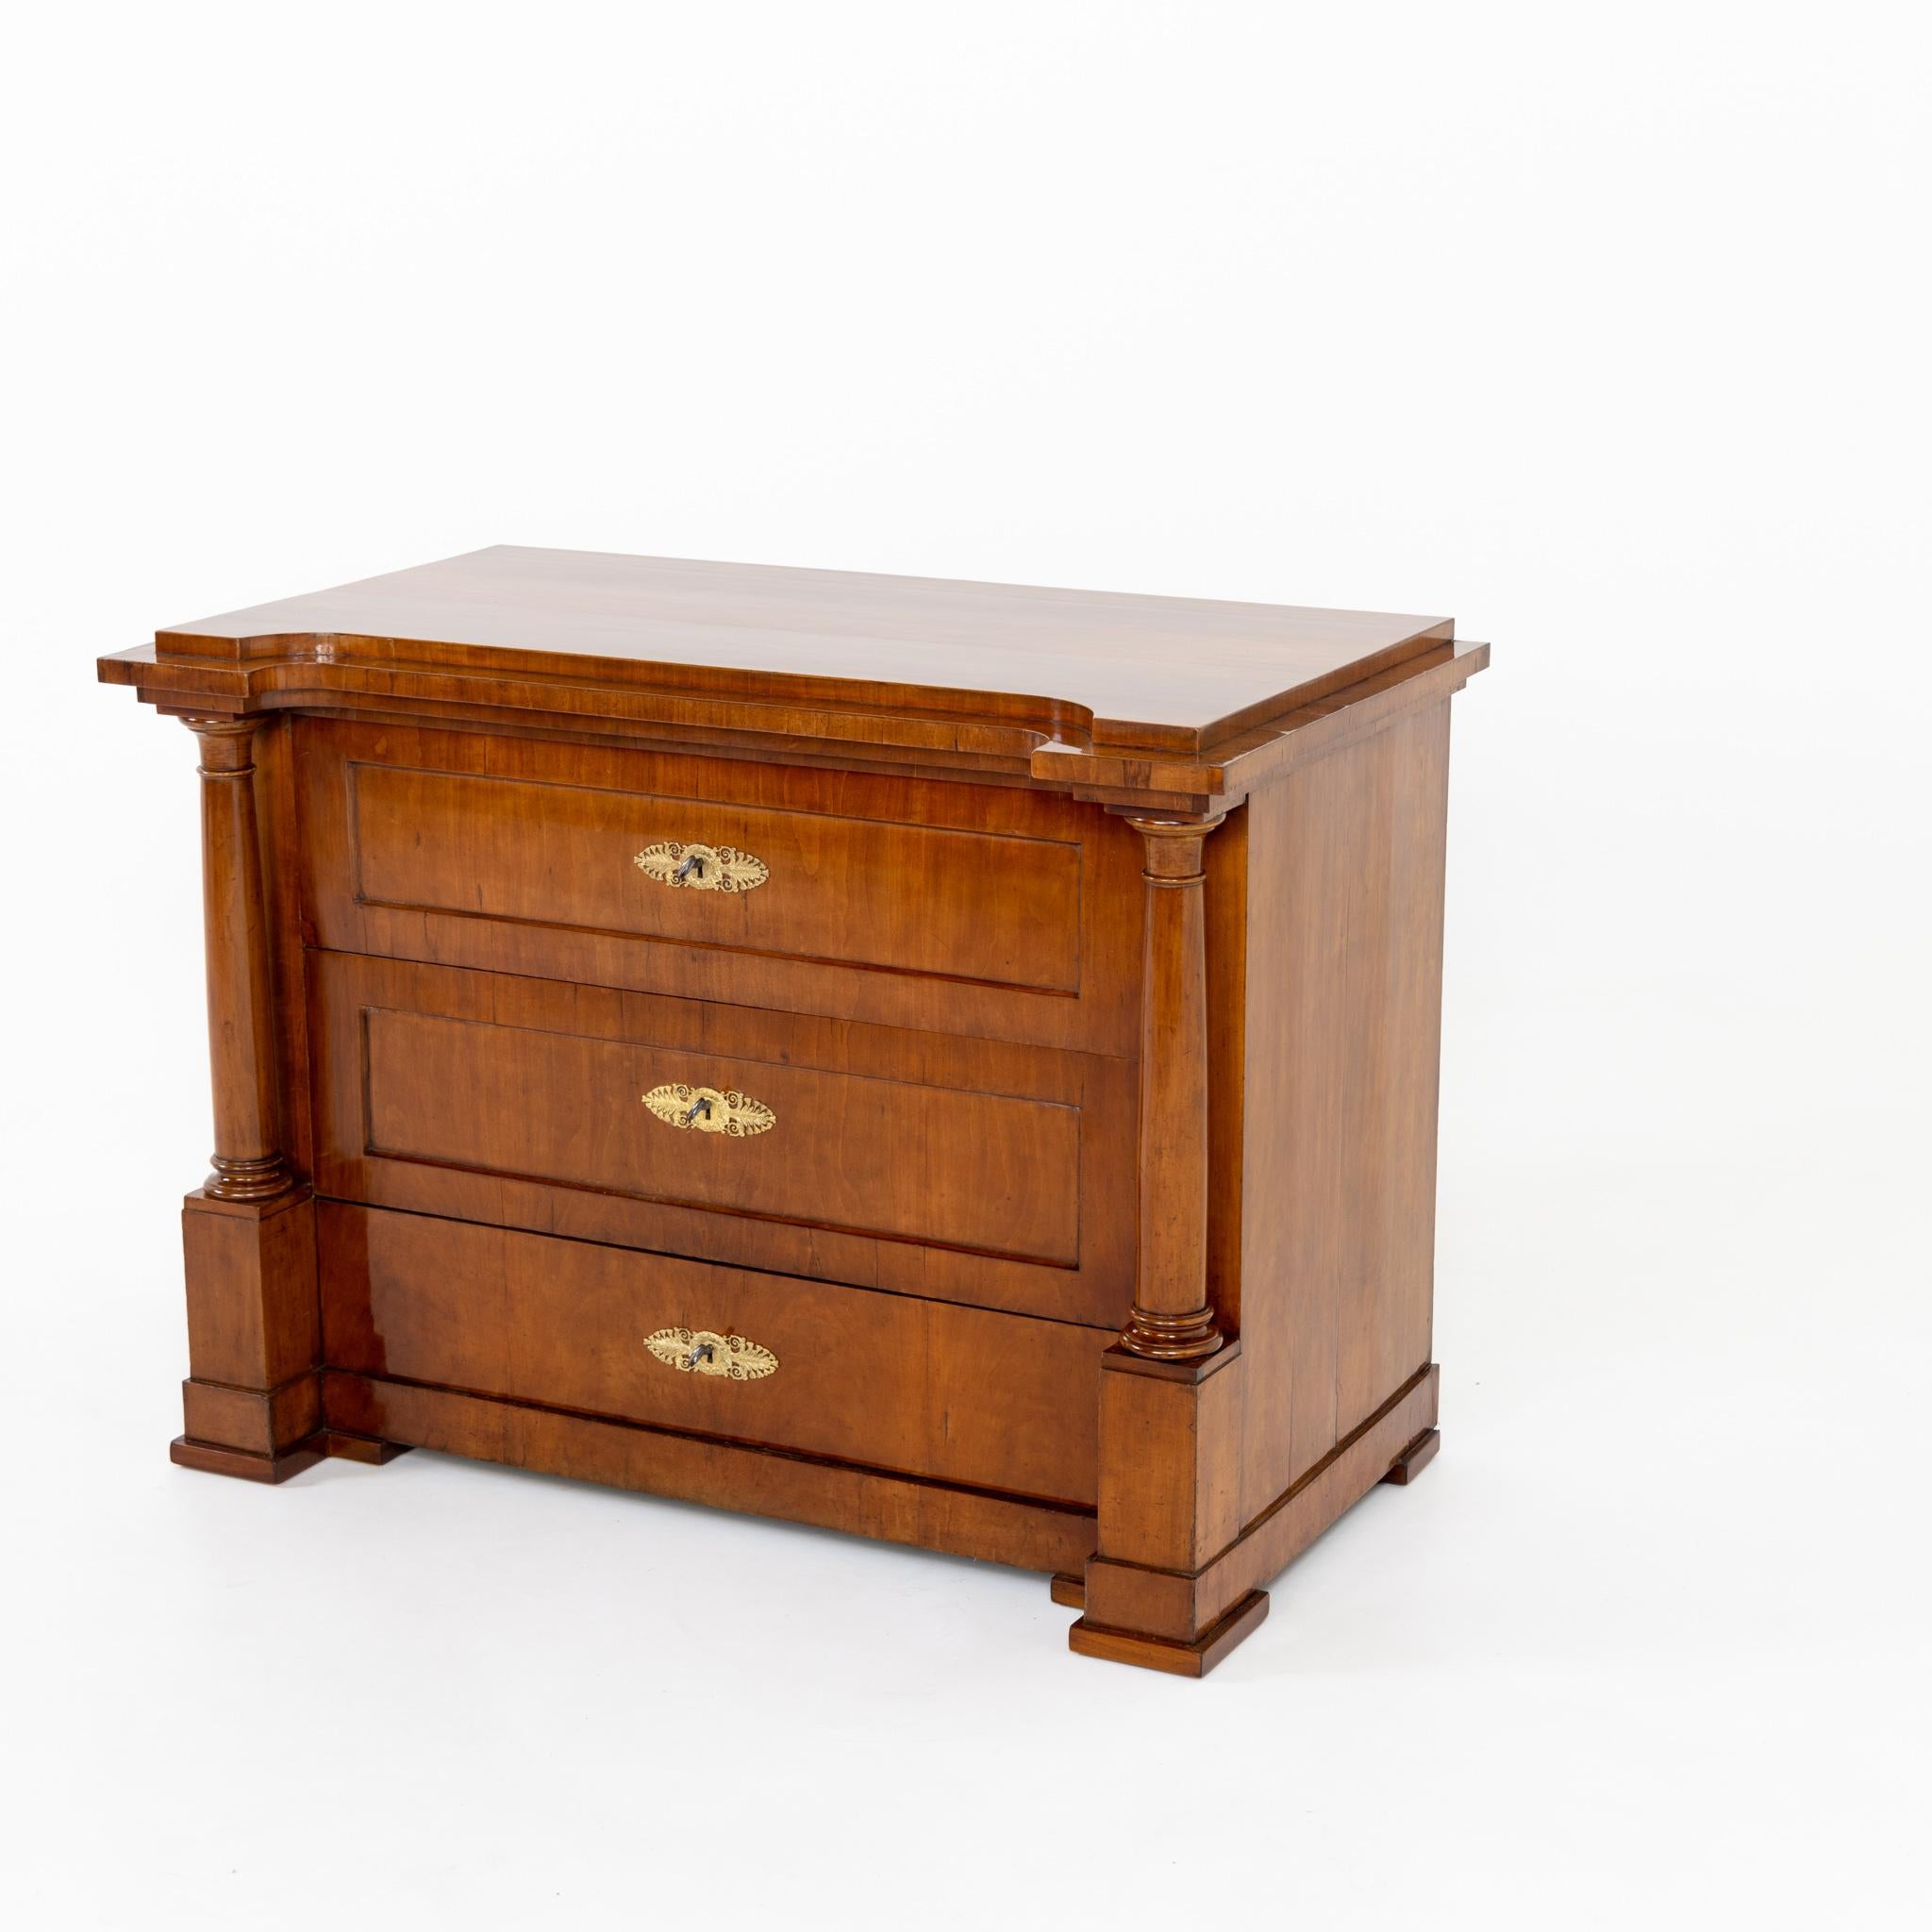 Early 19th Century Biedermeier Commode, Probably North Germany Around 1820 For Sale